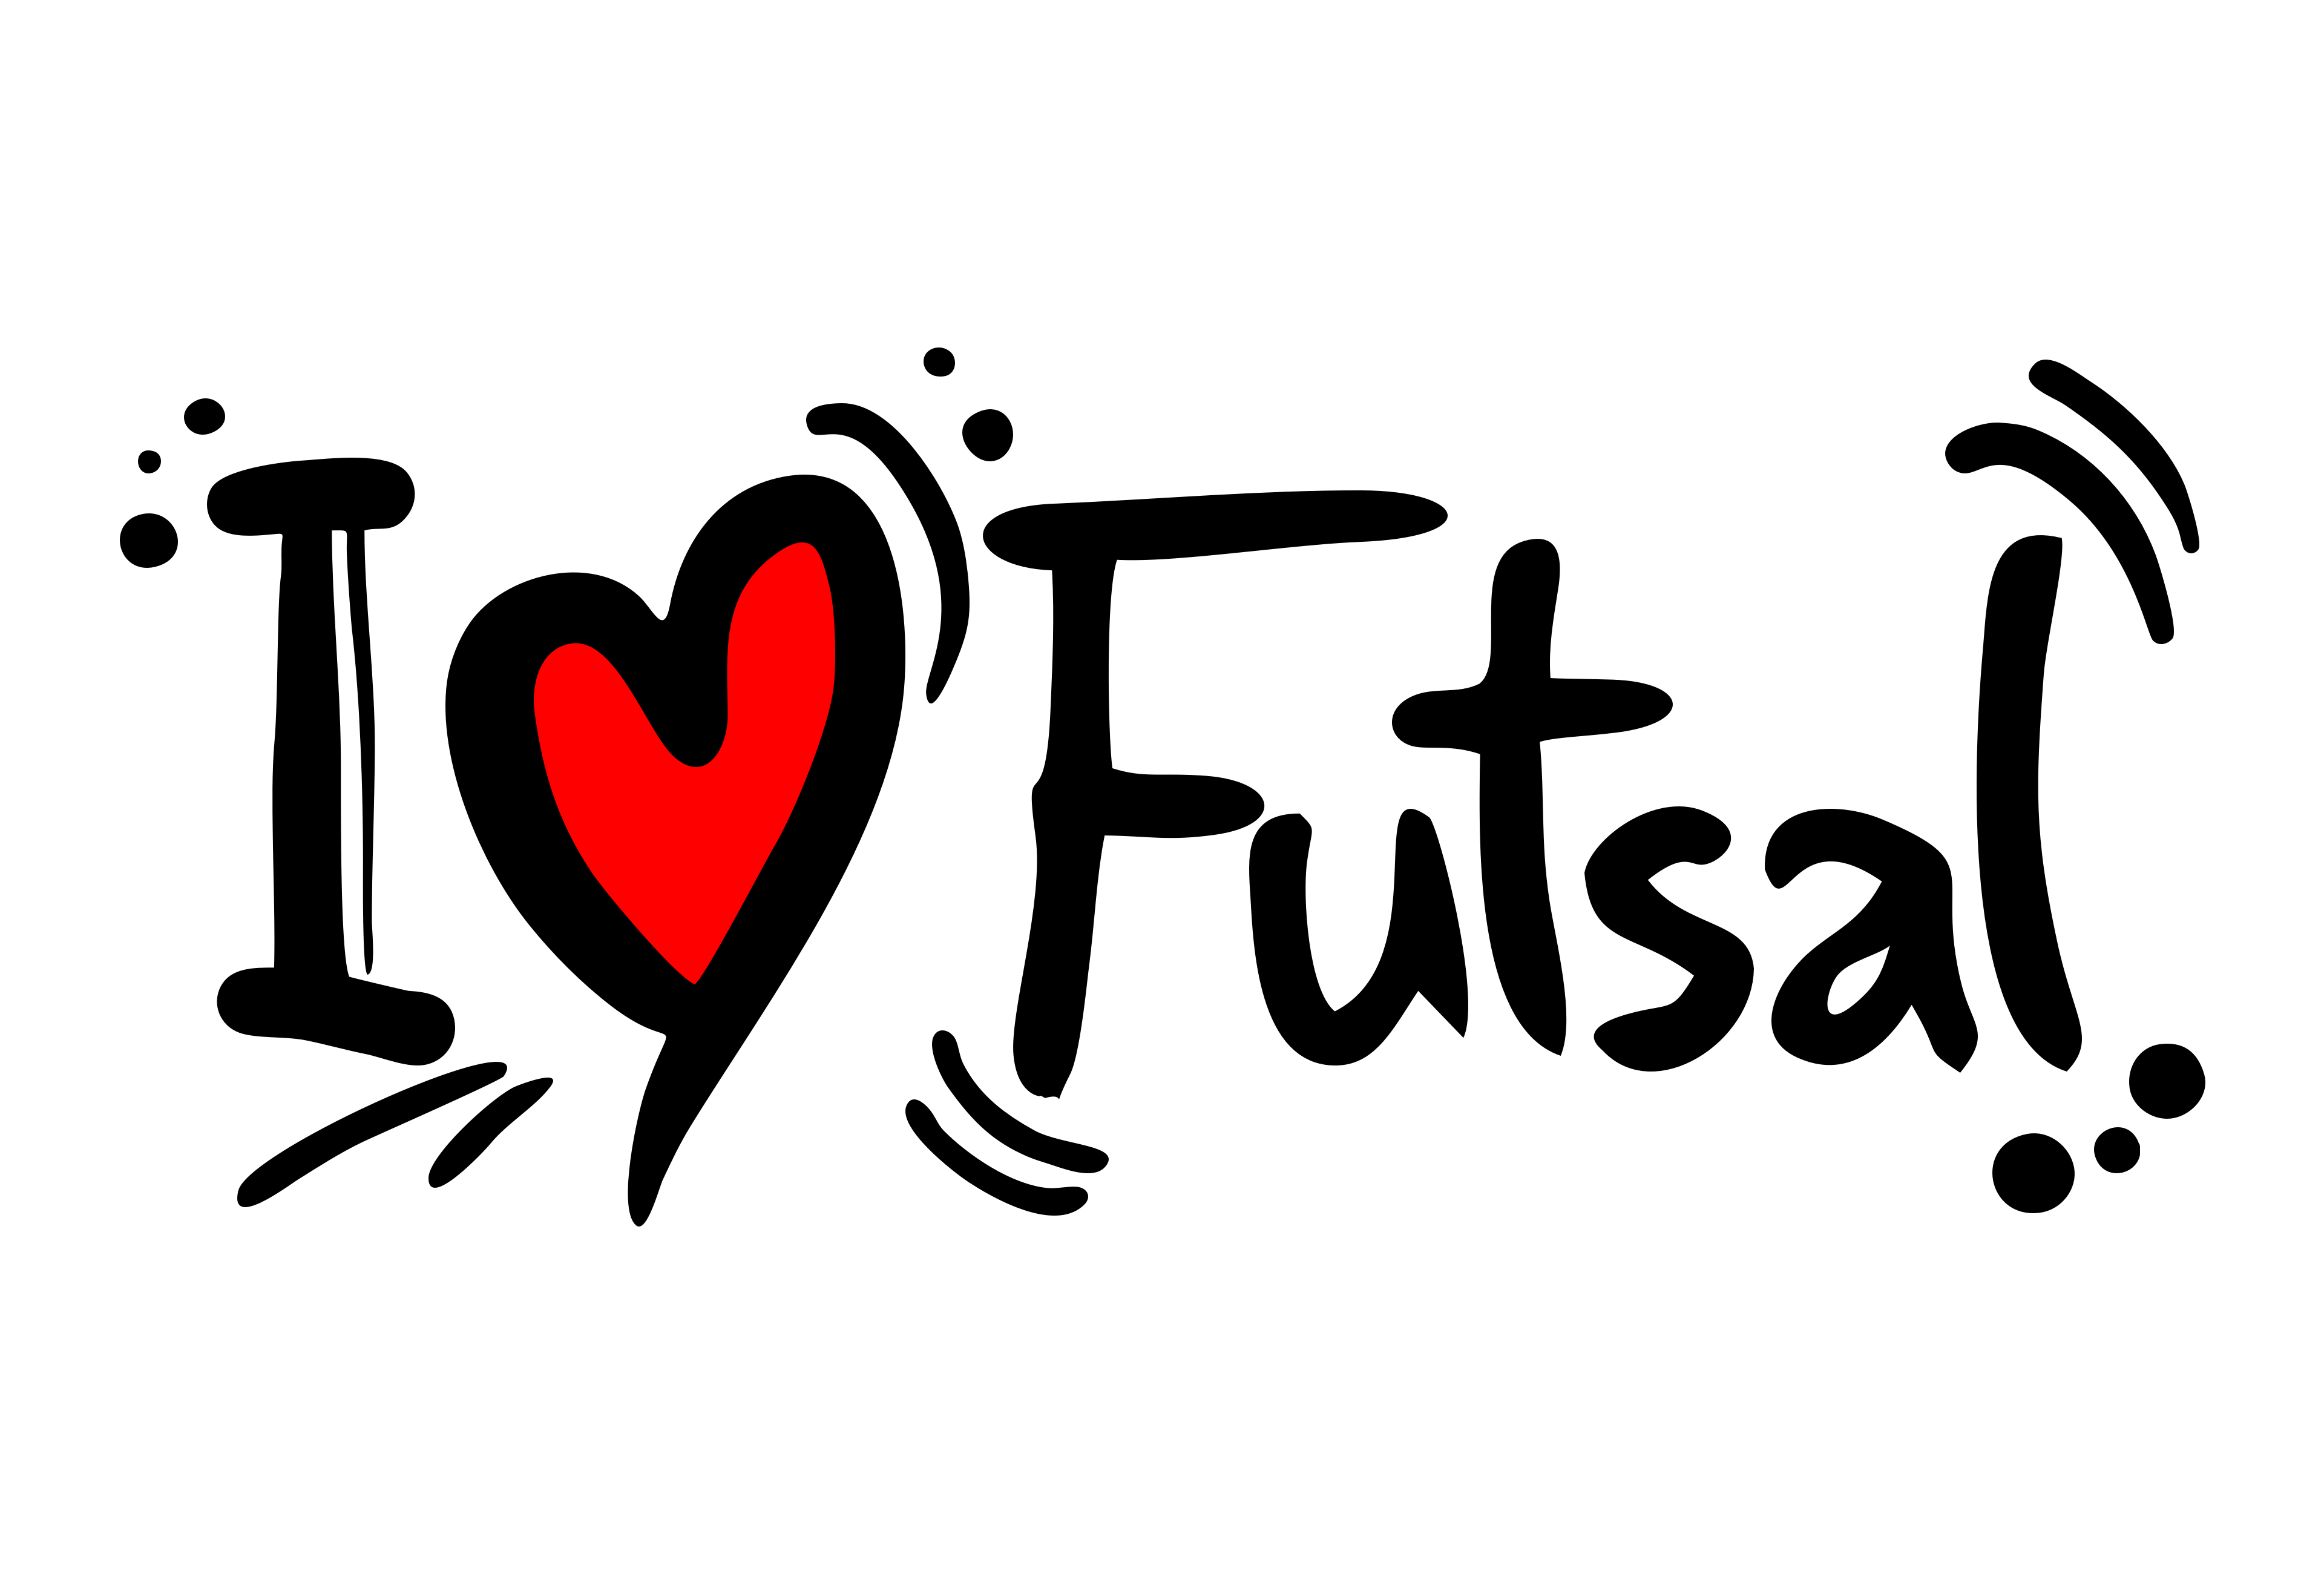 Graphic image of text I love Futsal with a red heart